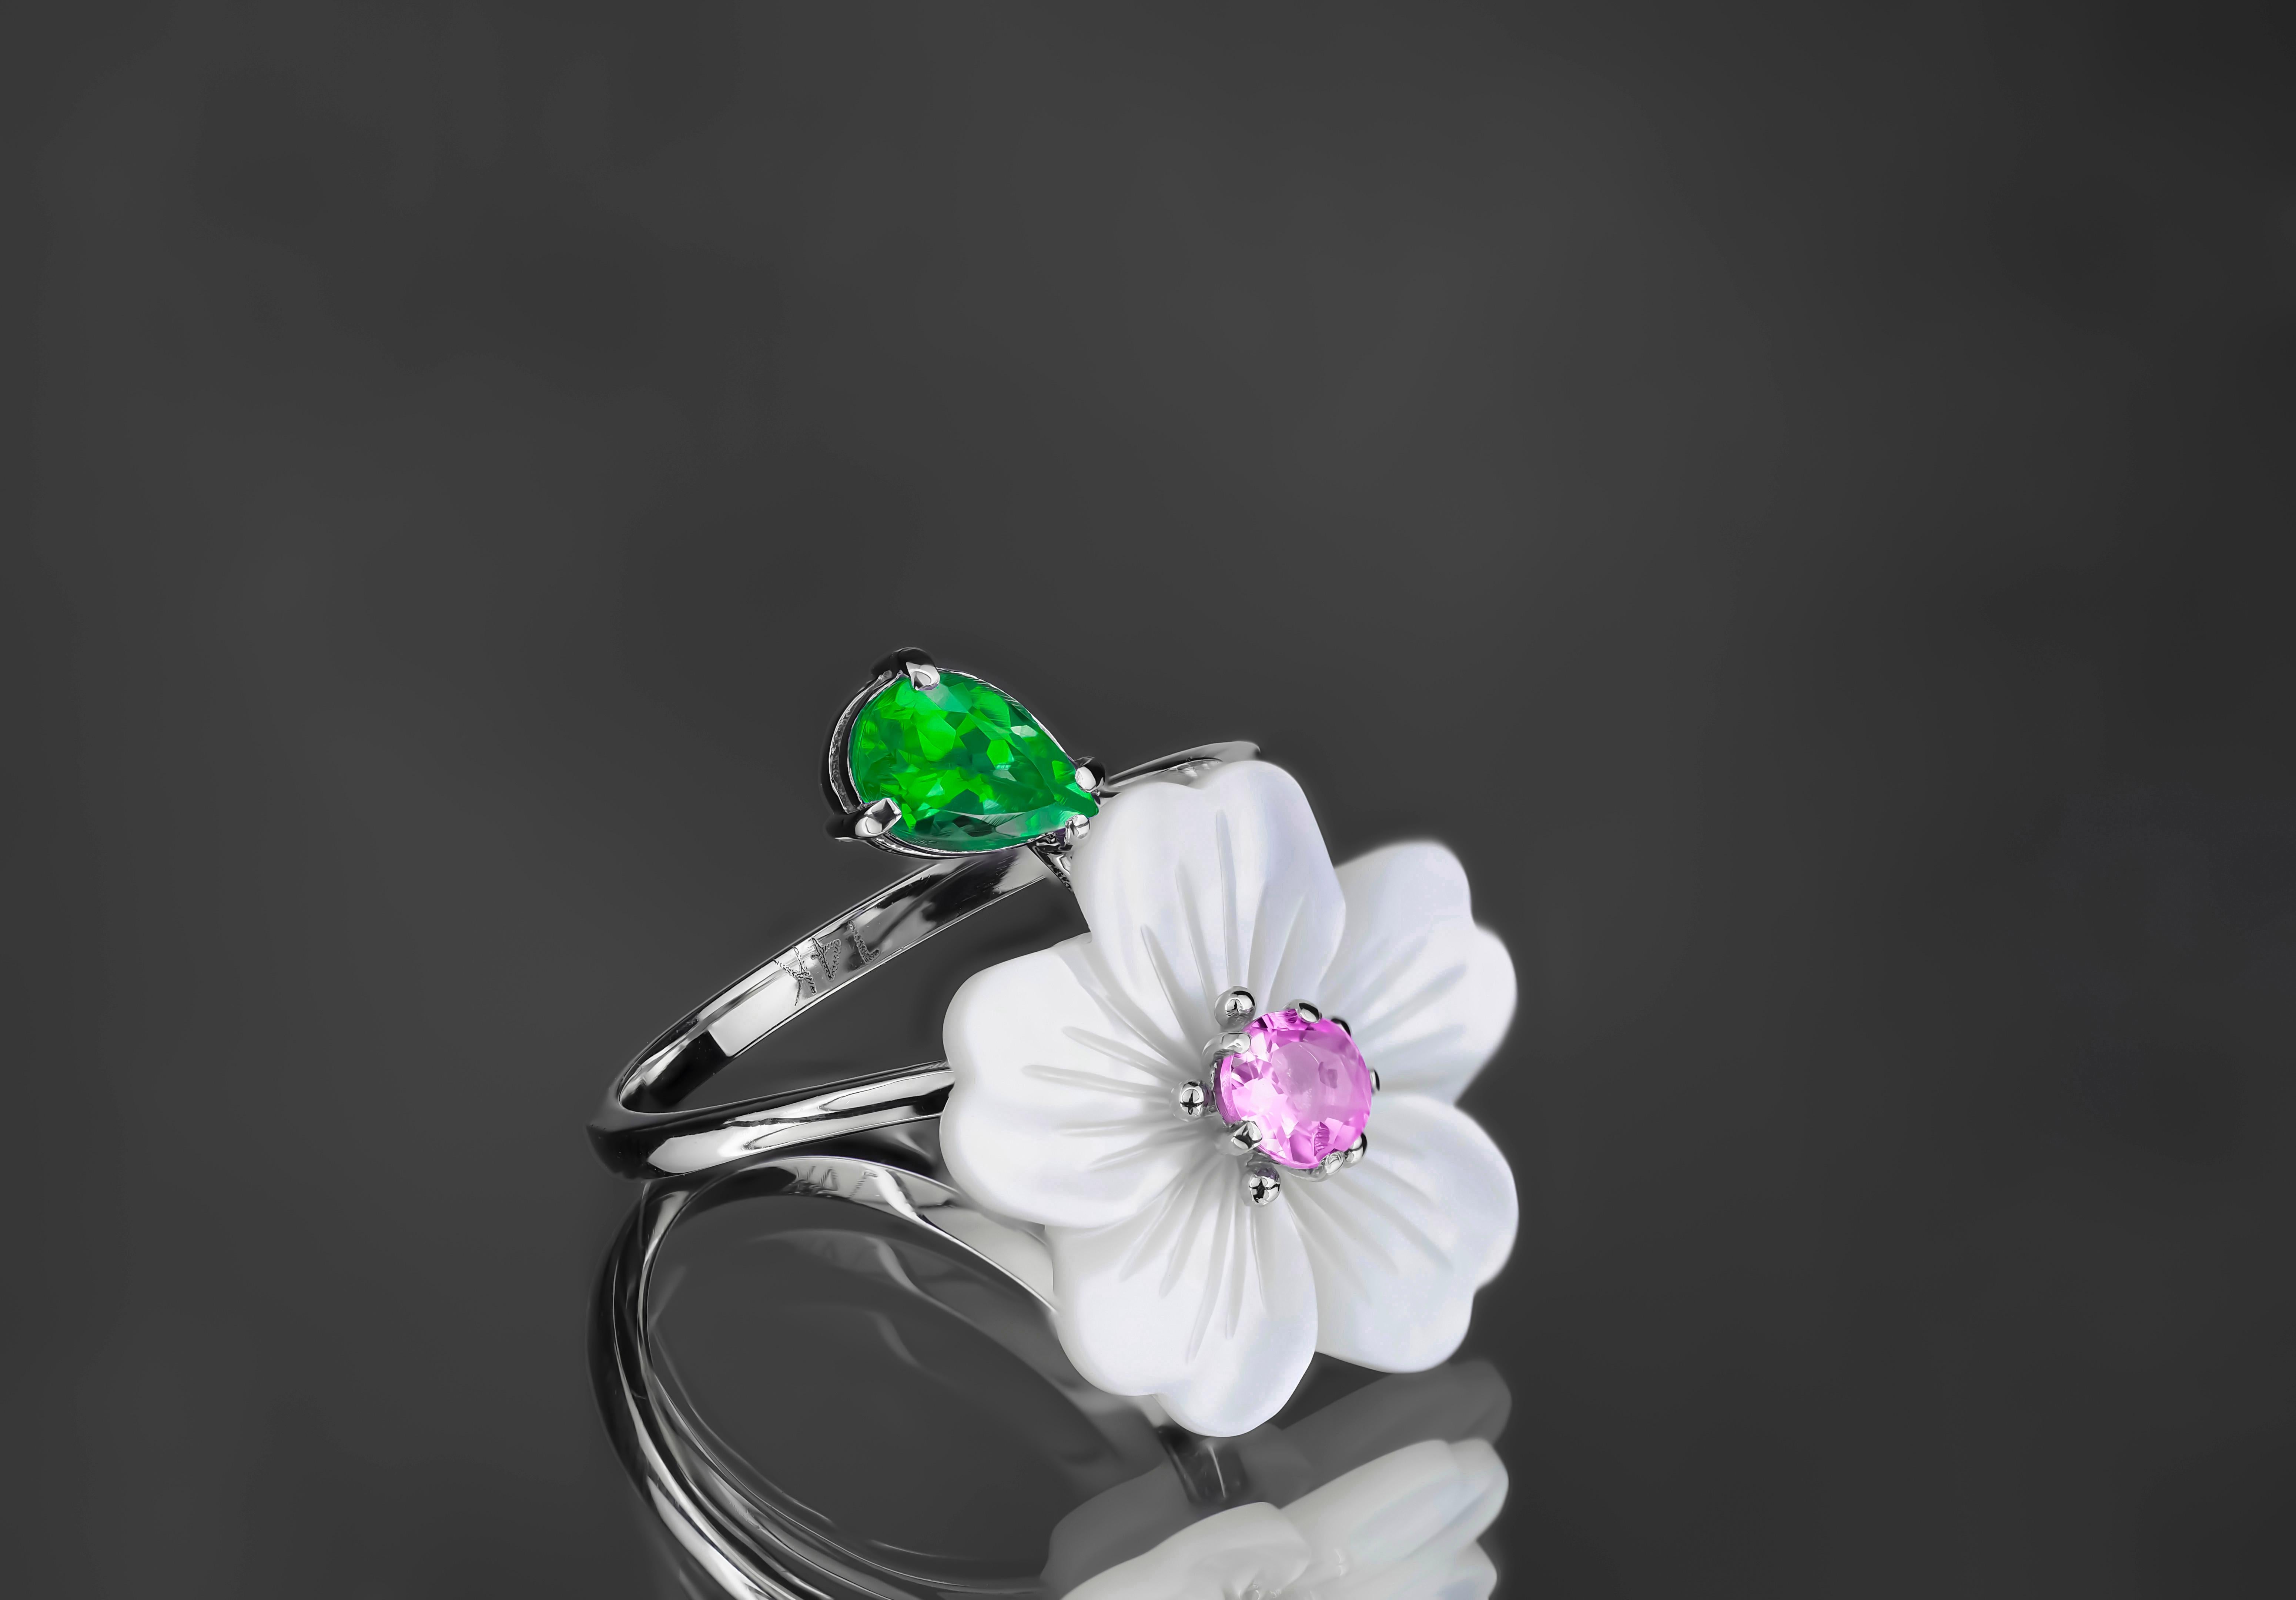 Carved Flower 14k ring with gemstones.
Lab emerald and sapphire ring in 14k gold. Carved mother of pearl flower ring. Flower gold ring. Emerald vintage ring. Nature inspired ring with mother of pearl flower. Shell flower ring.

Metal: 14k solid